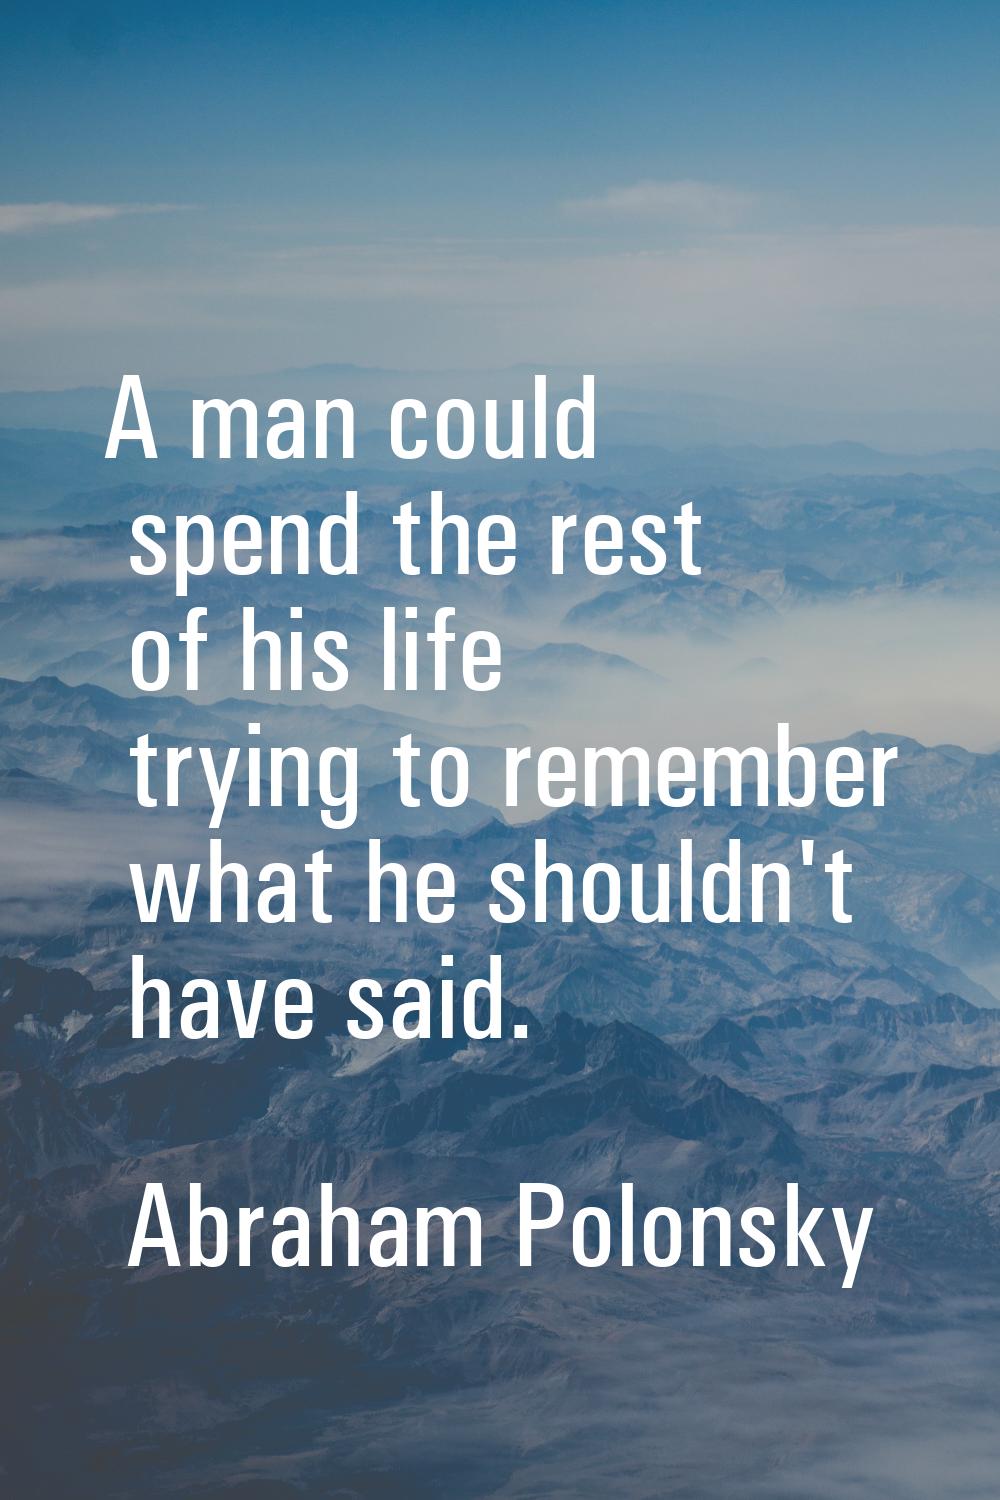 A man could spend the rest of his life trying to remember what he shouldn't have said.